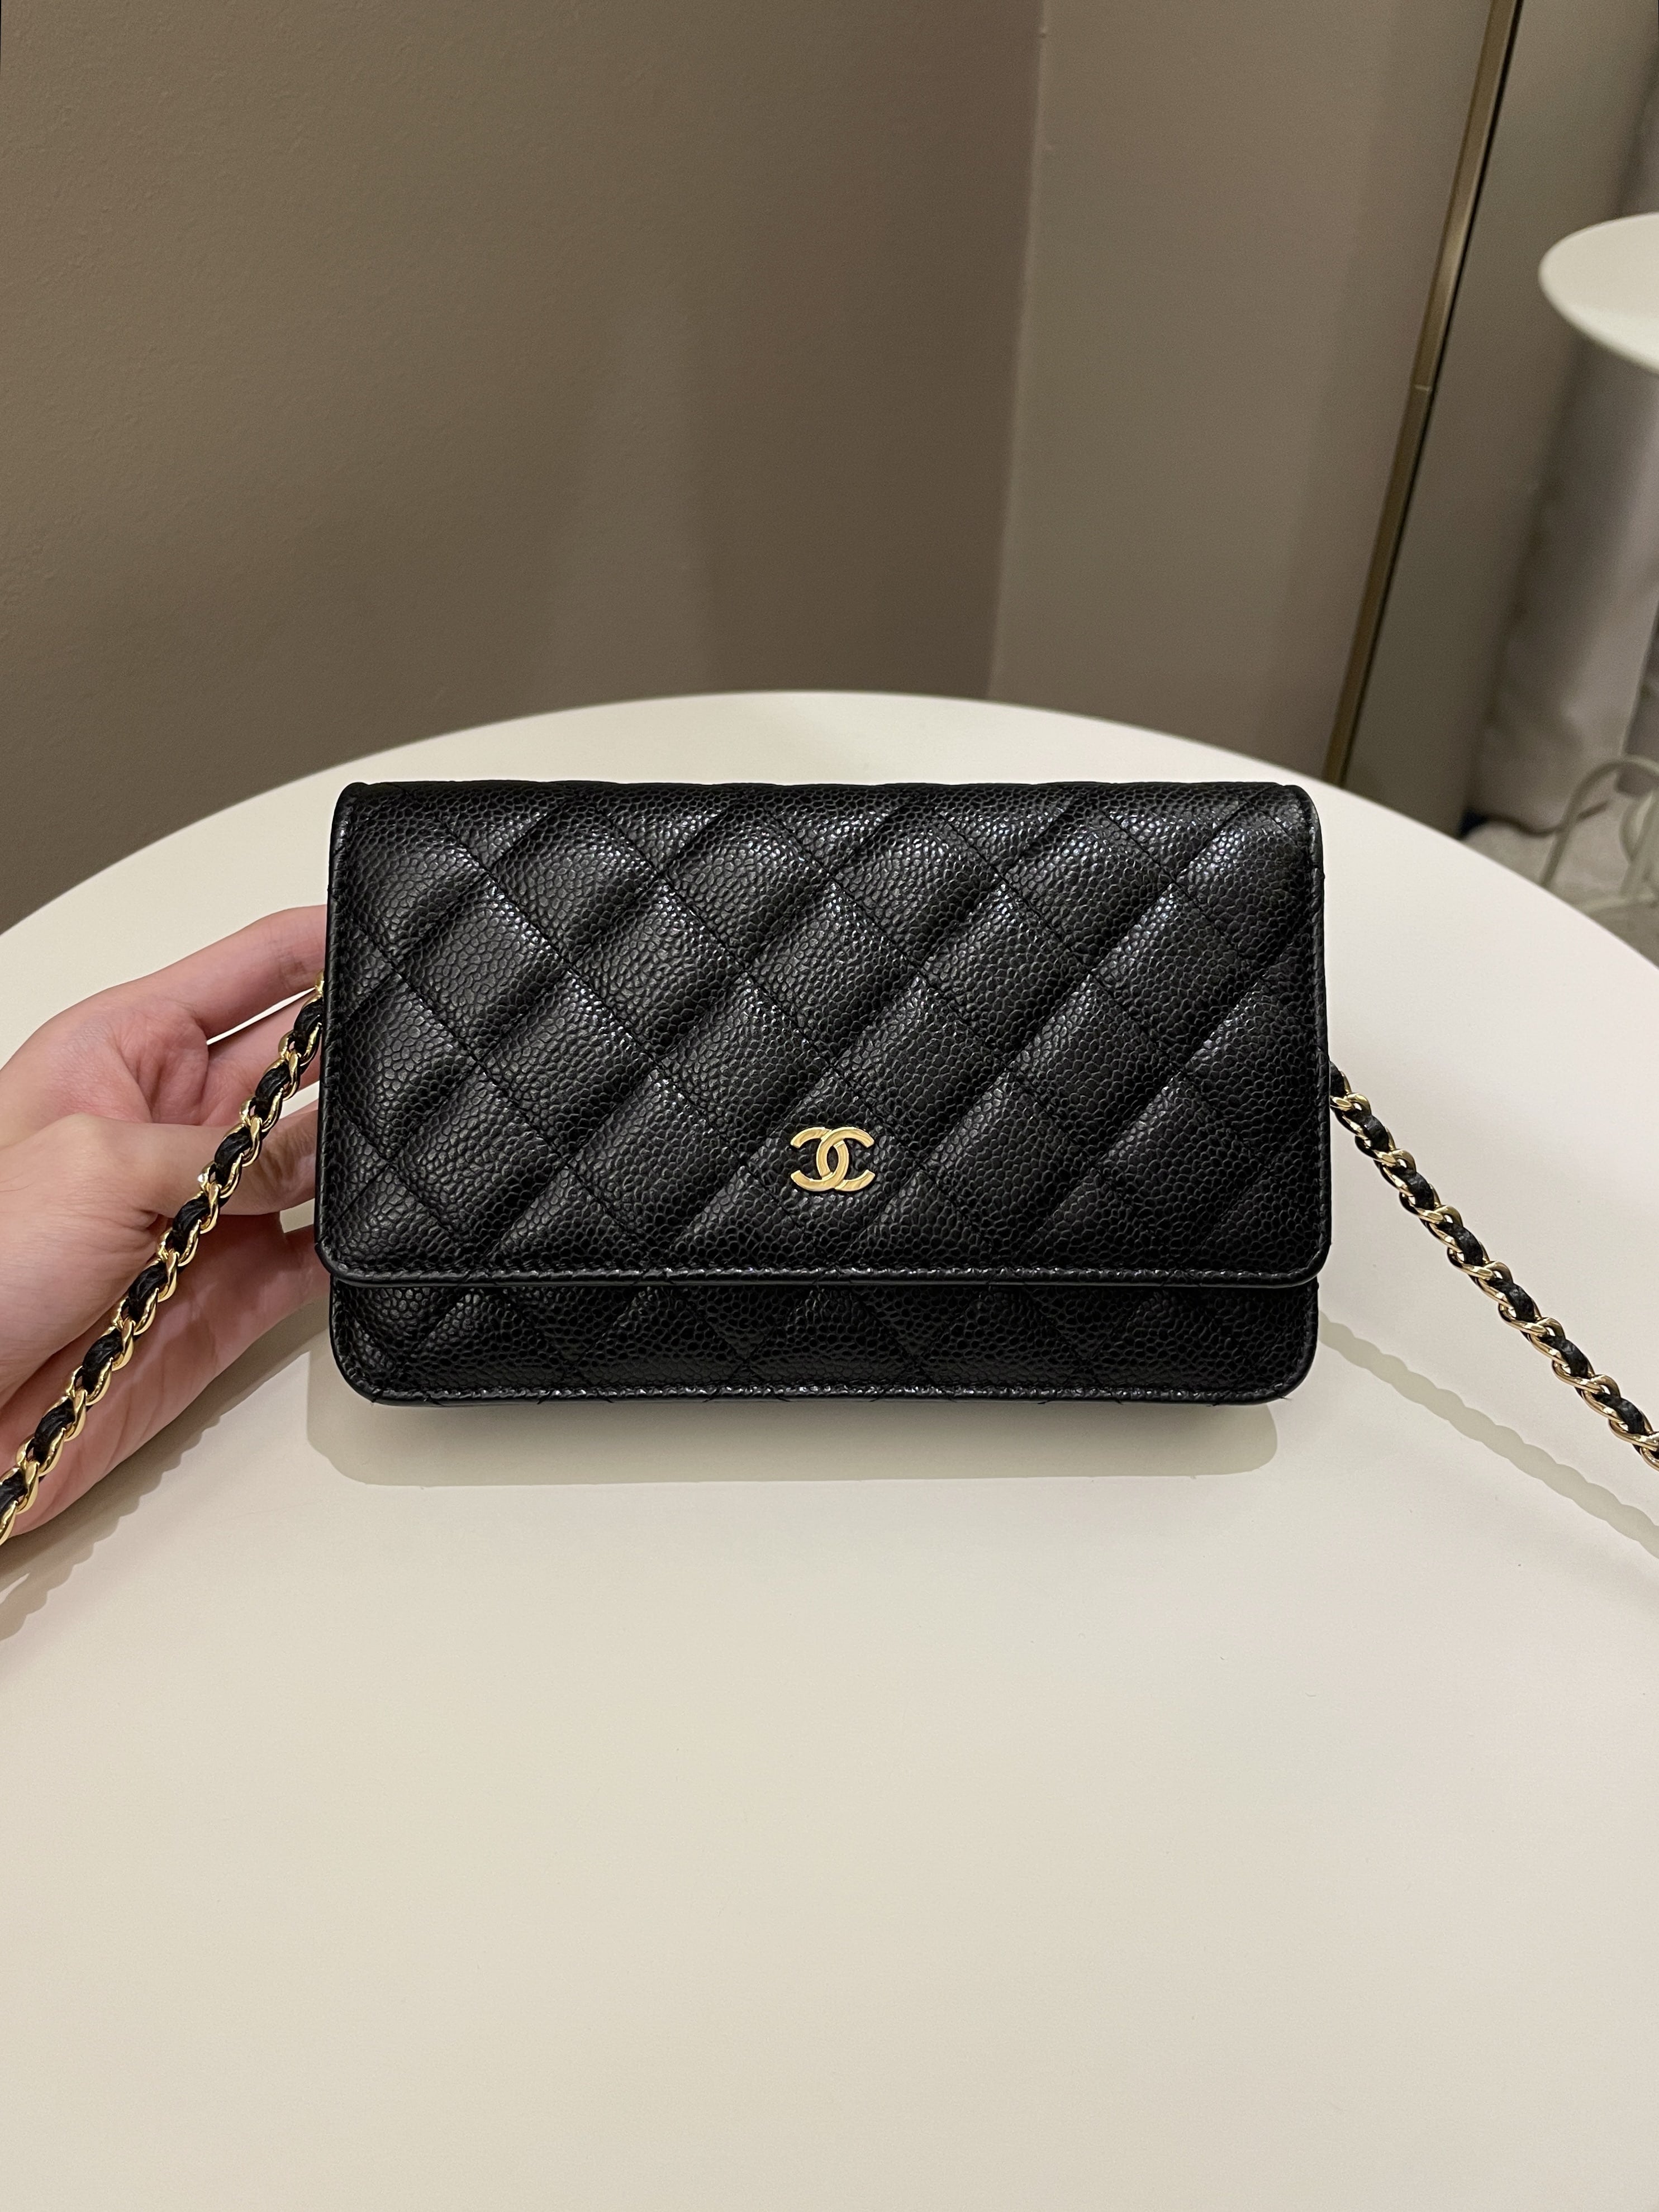 black chanel purse with gold chain